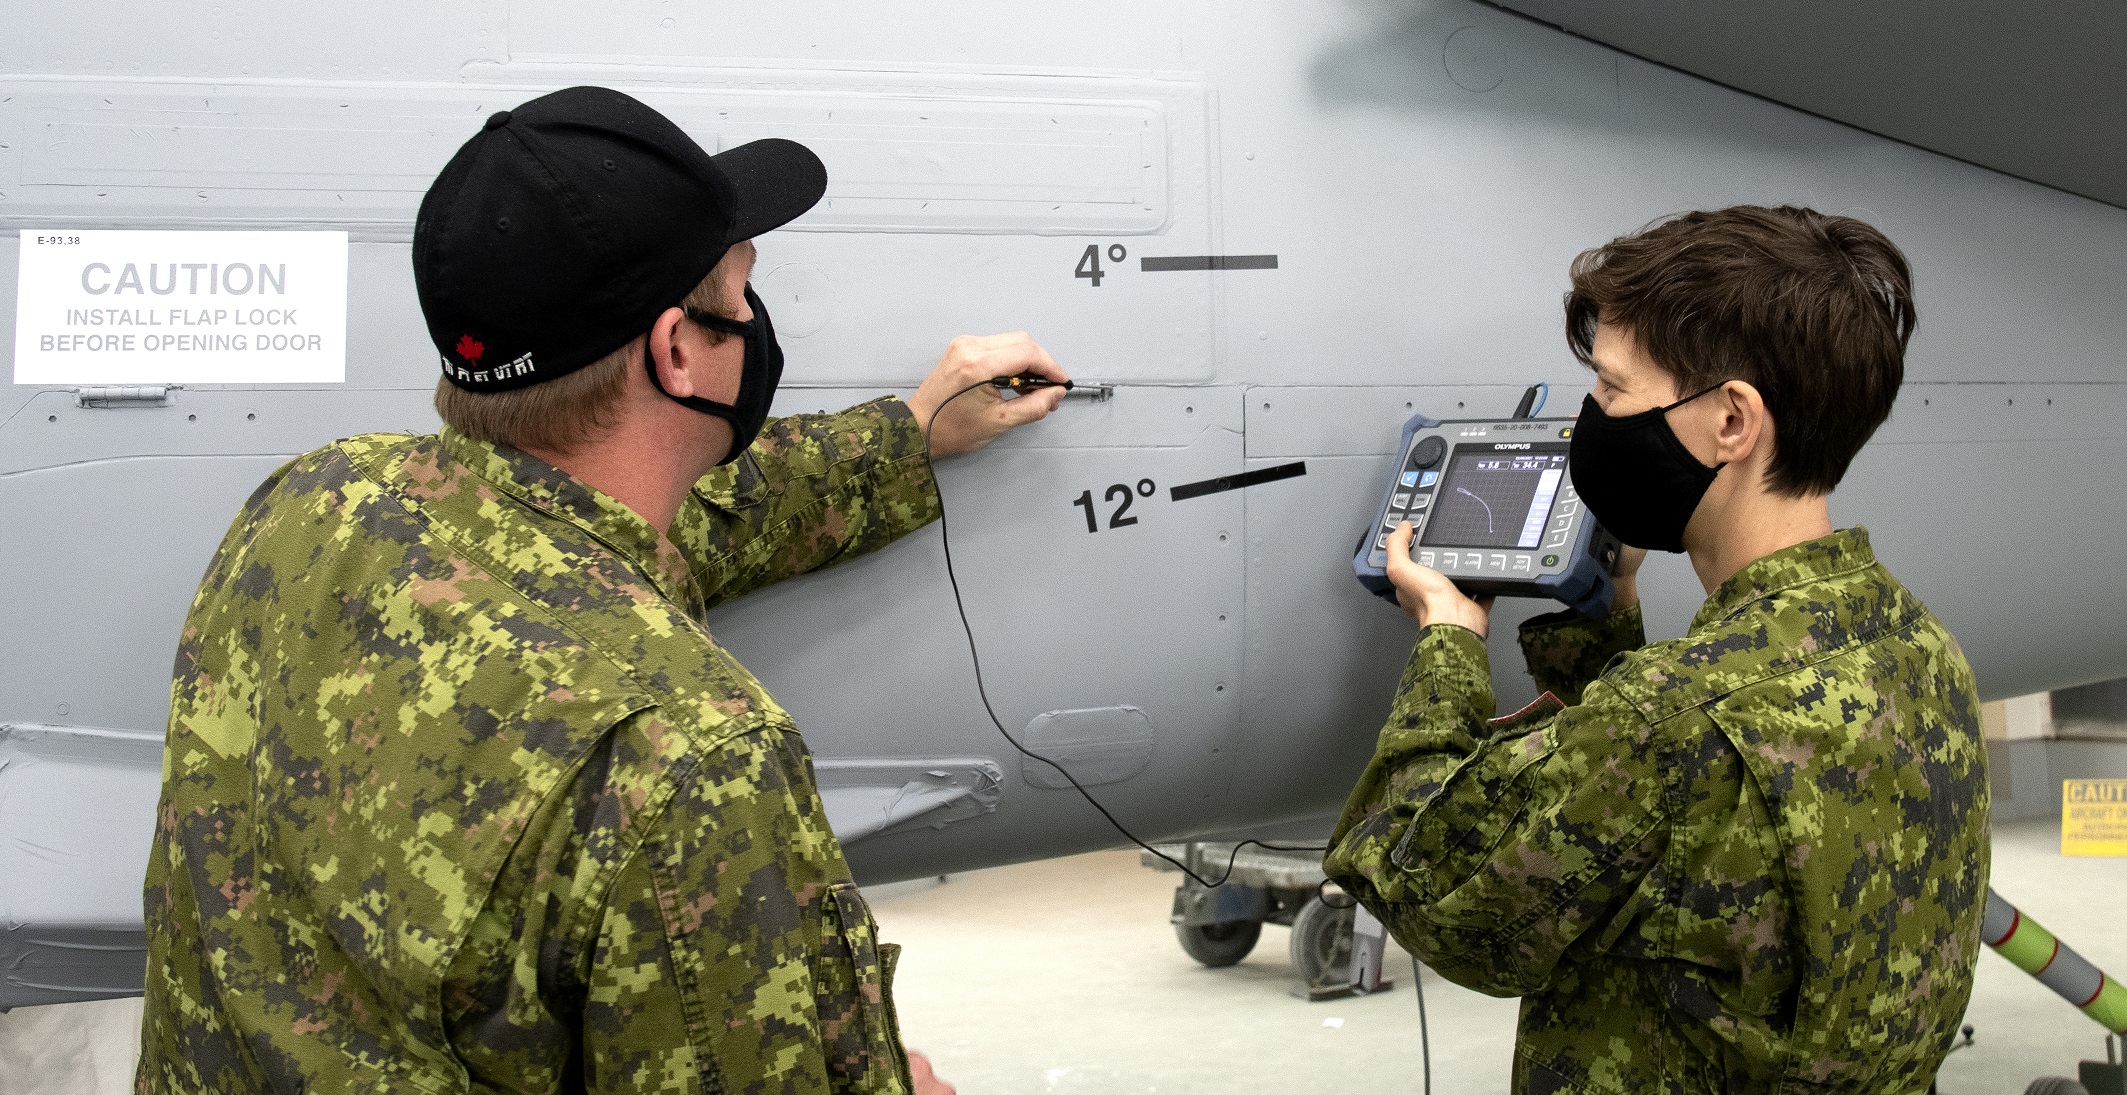 Non-destructive testing technicians Corporal Eddy Ford (left) from 8 AMS, and Corporal Maggie Selley (right), from ATESS, inspect the fuselage of a CF-18 Hornet for cracks in the skin (surface) using eddy current testing techniques.  